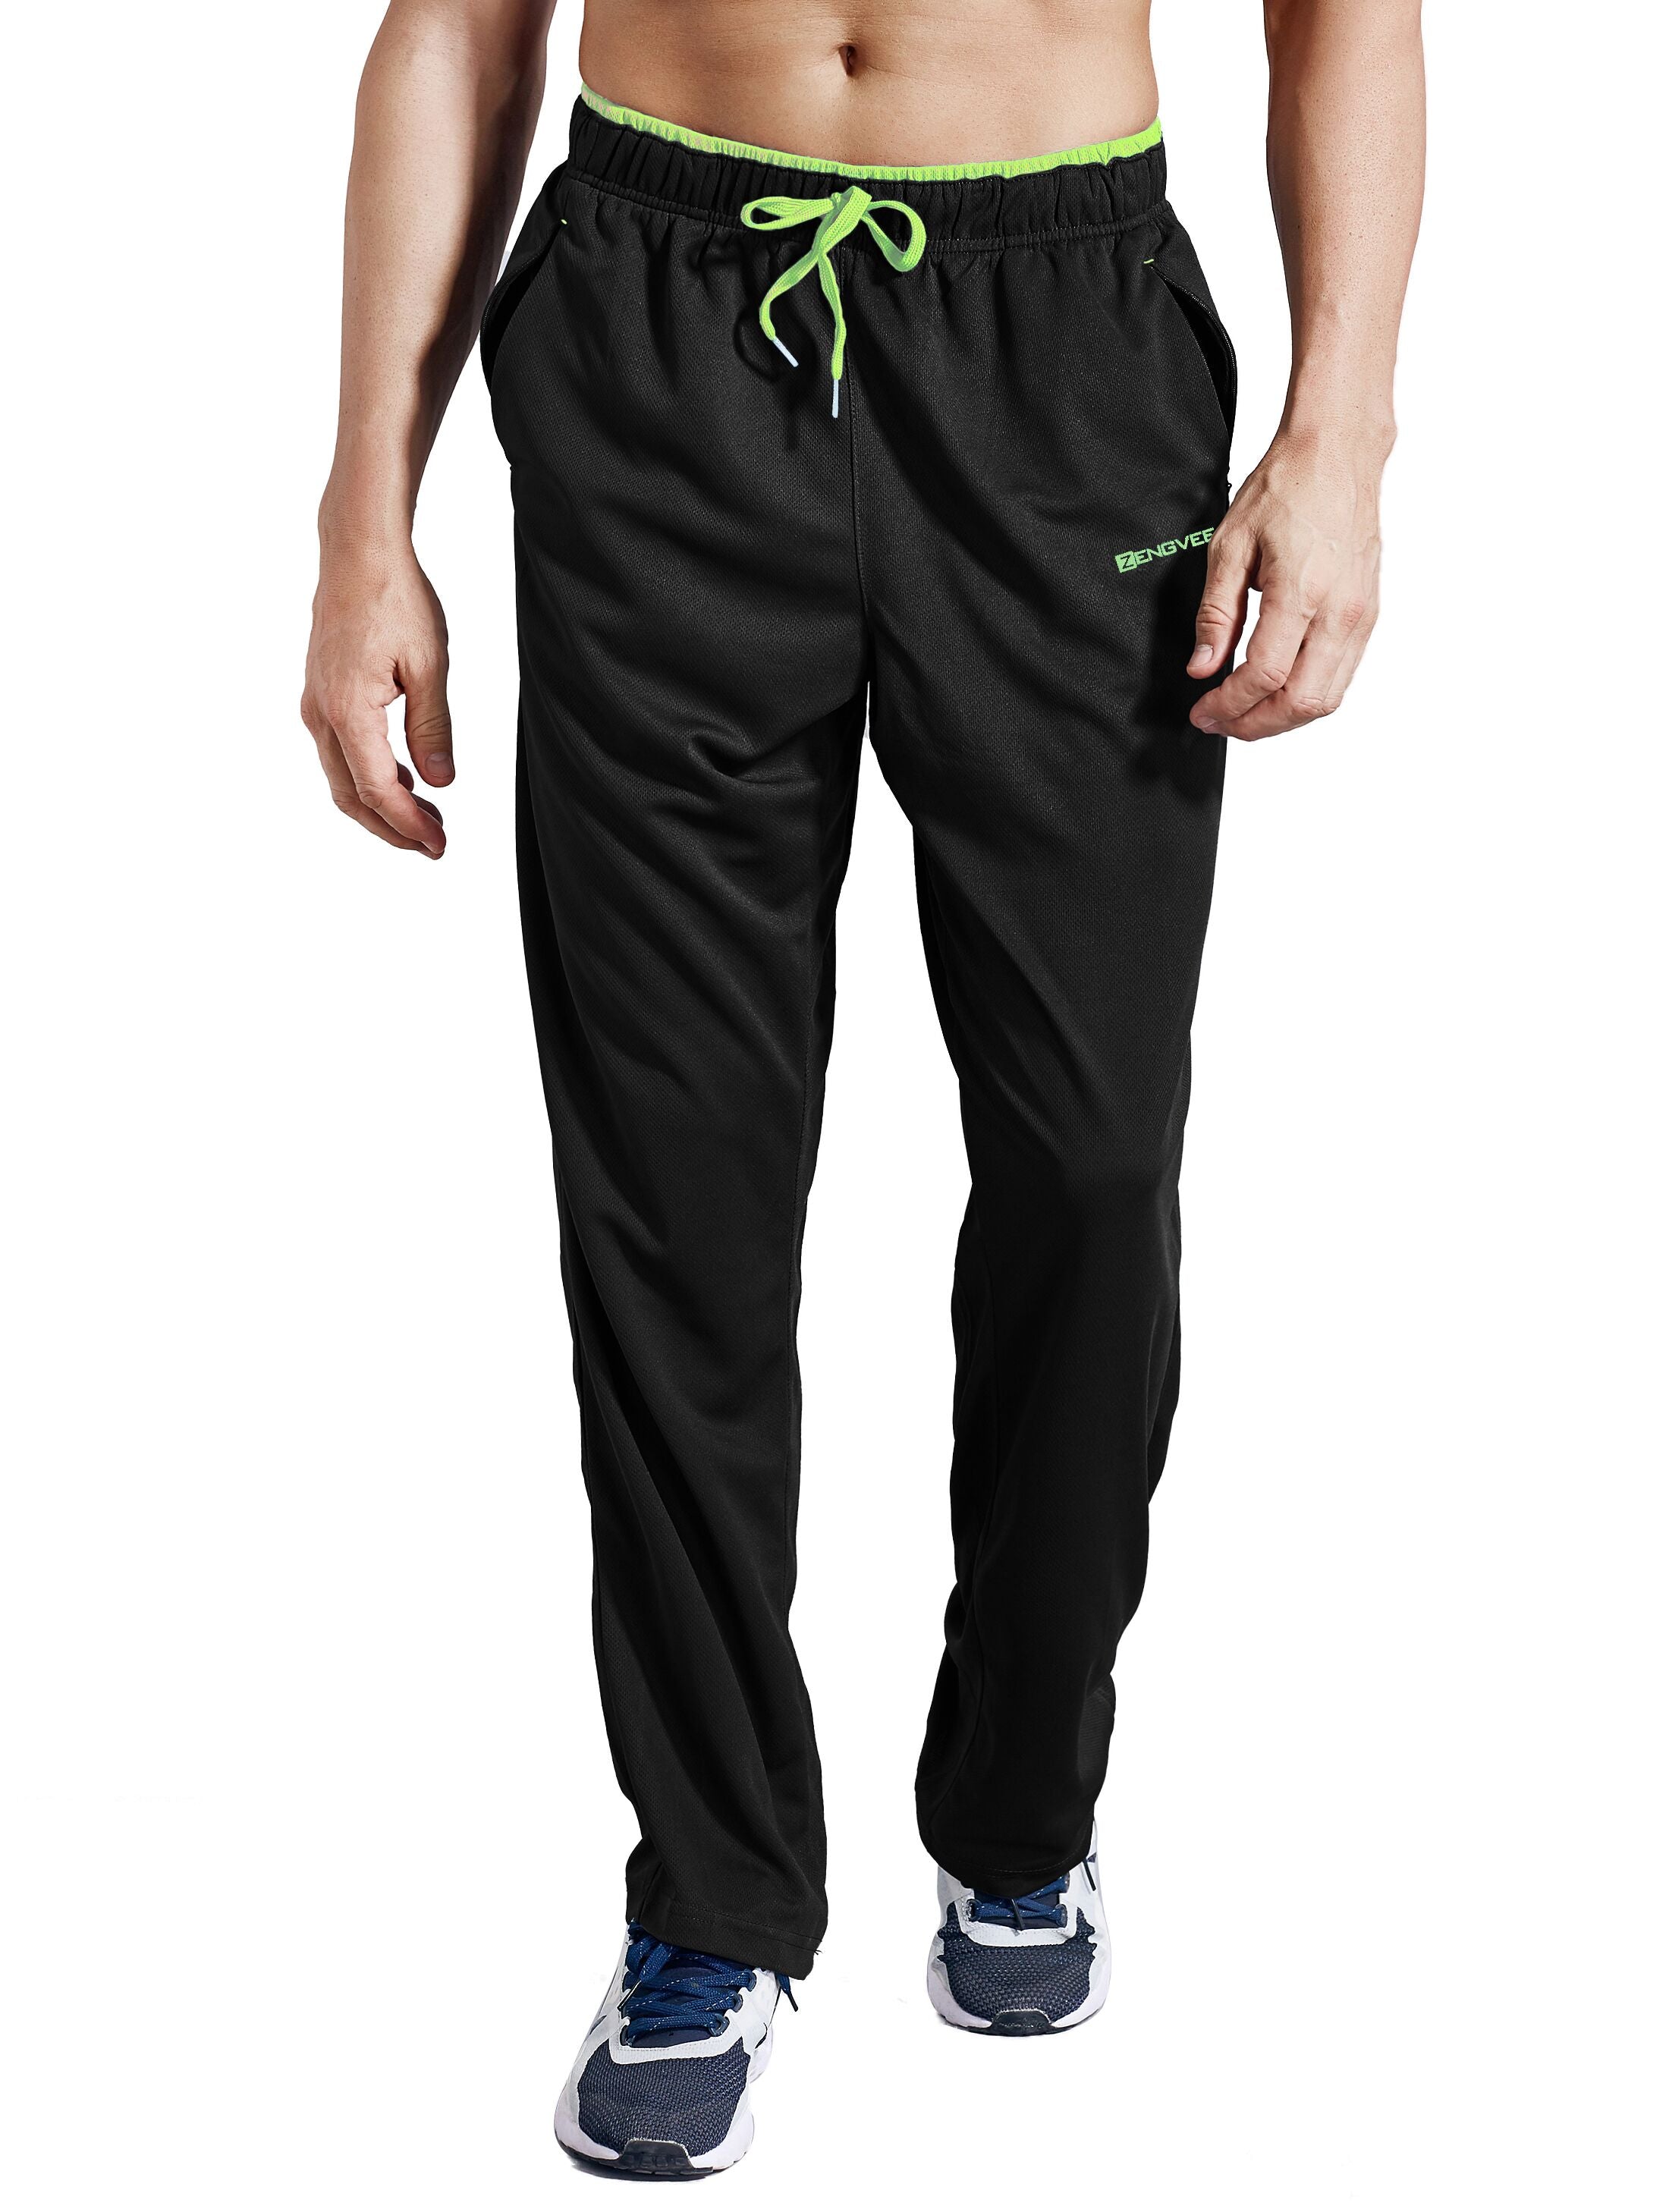 OuBER Men's Gym Jogger Pants Slim Fit Workout Running Sweatpants with  Zipper Poc